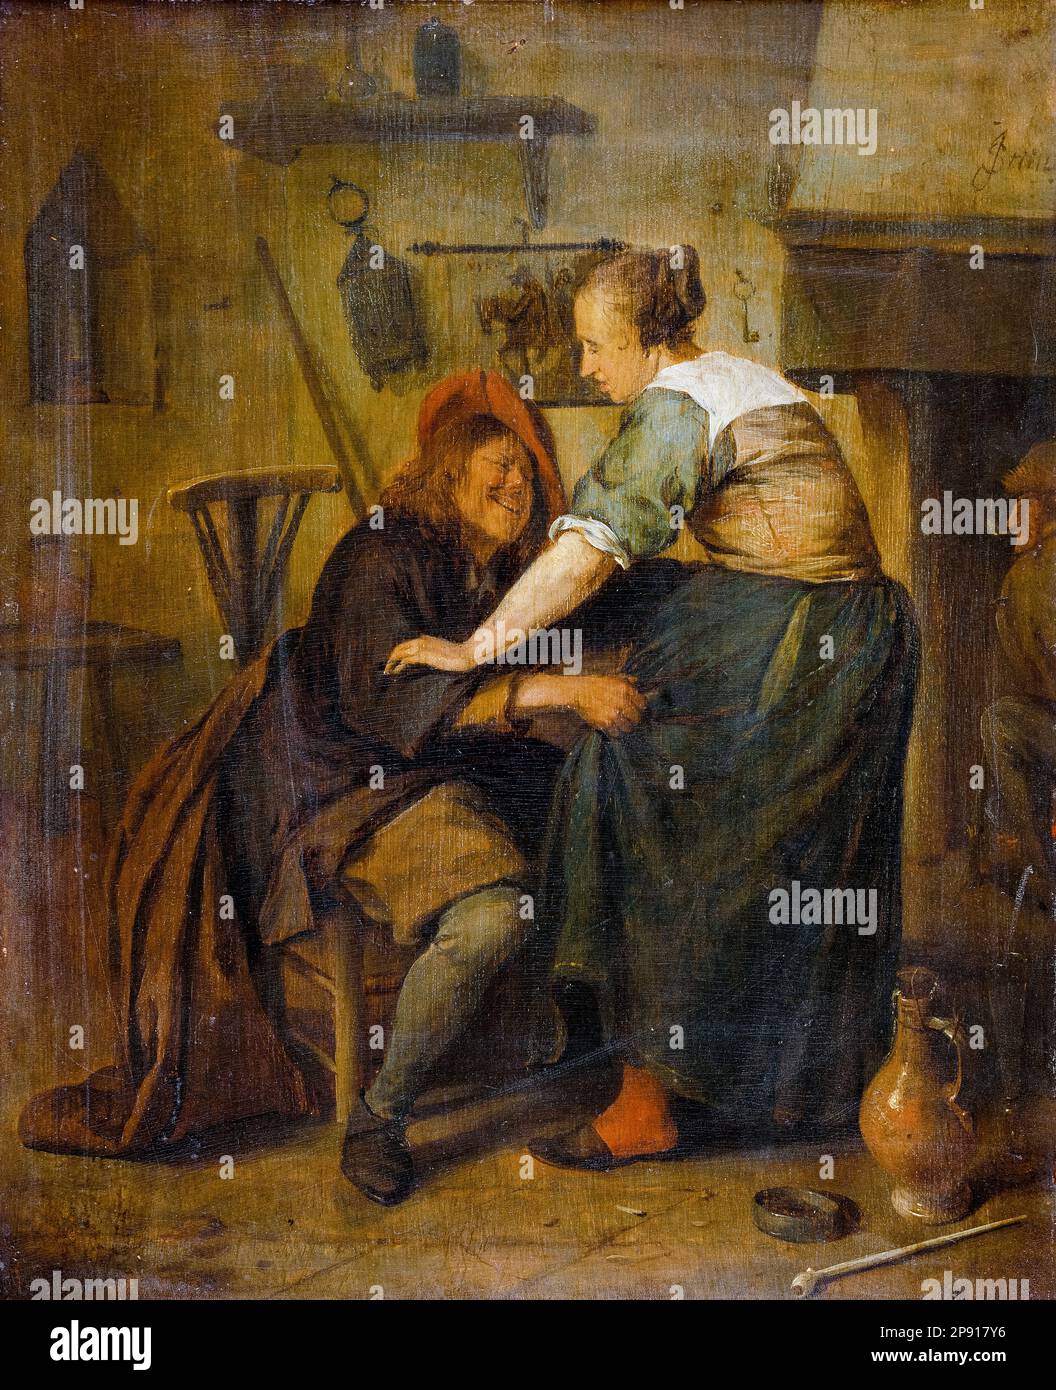 Jan Steen, Tavern with guest and barmaid, (The pushy Guest), painting in oil on panel, circa 1665 Stock Photo